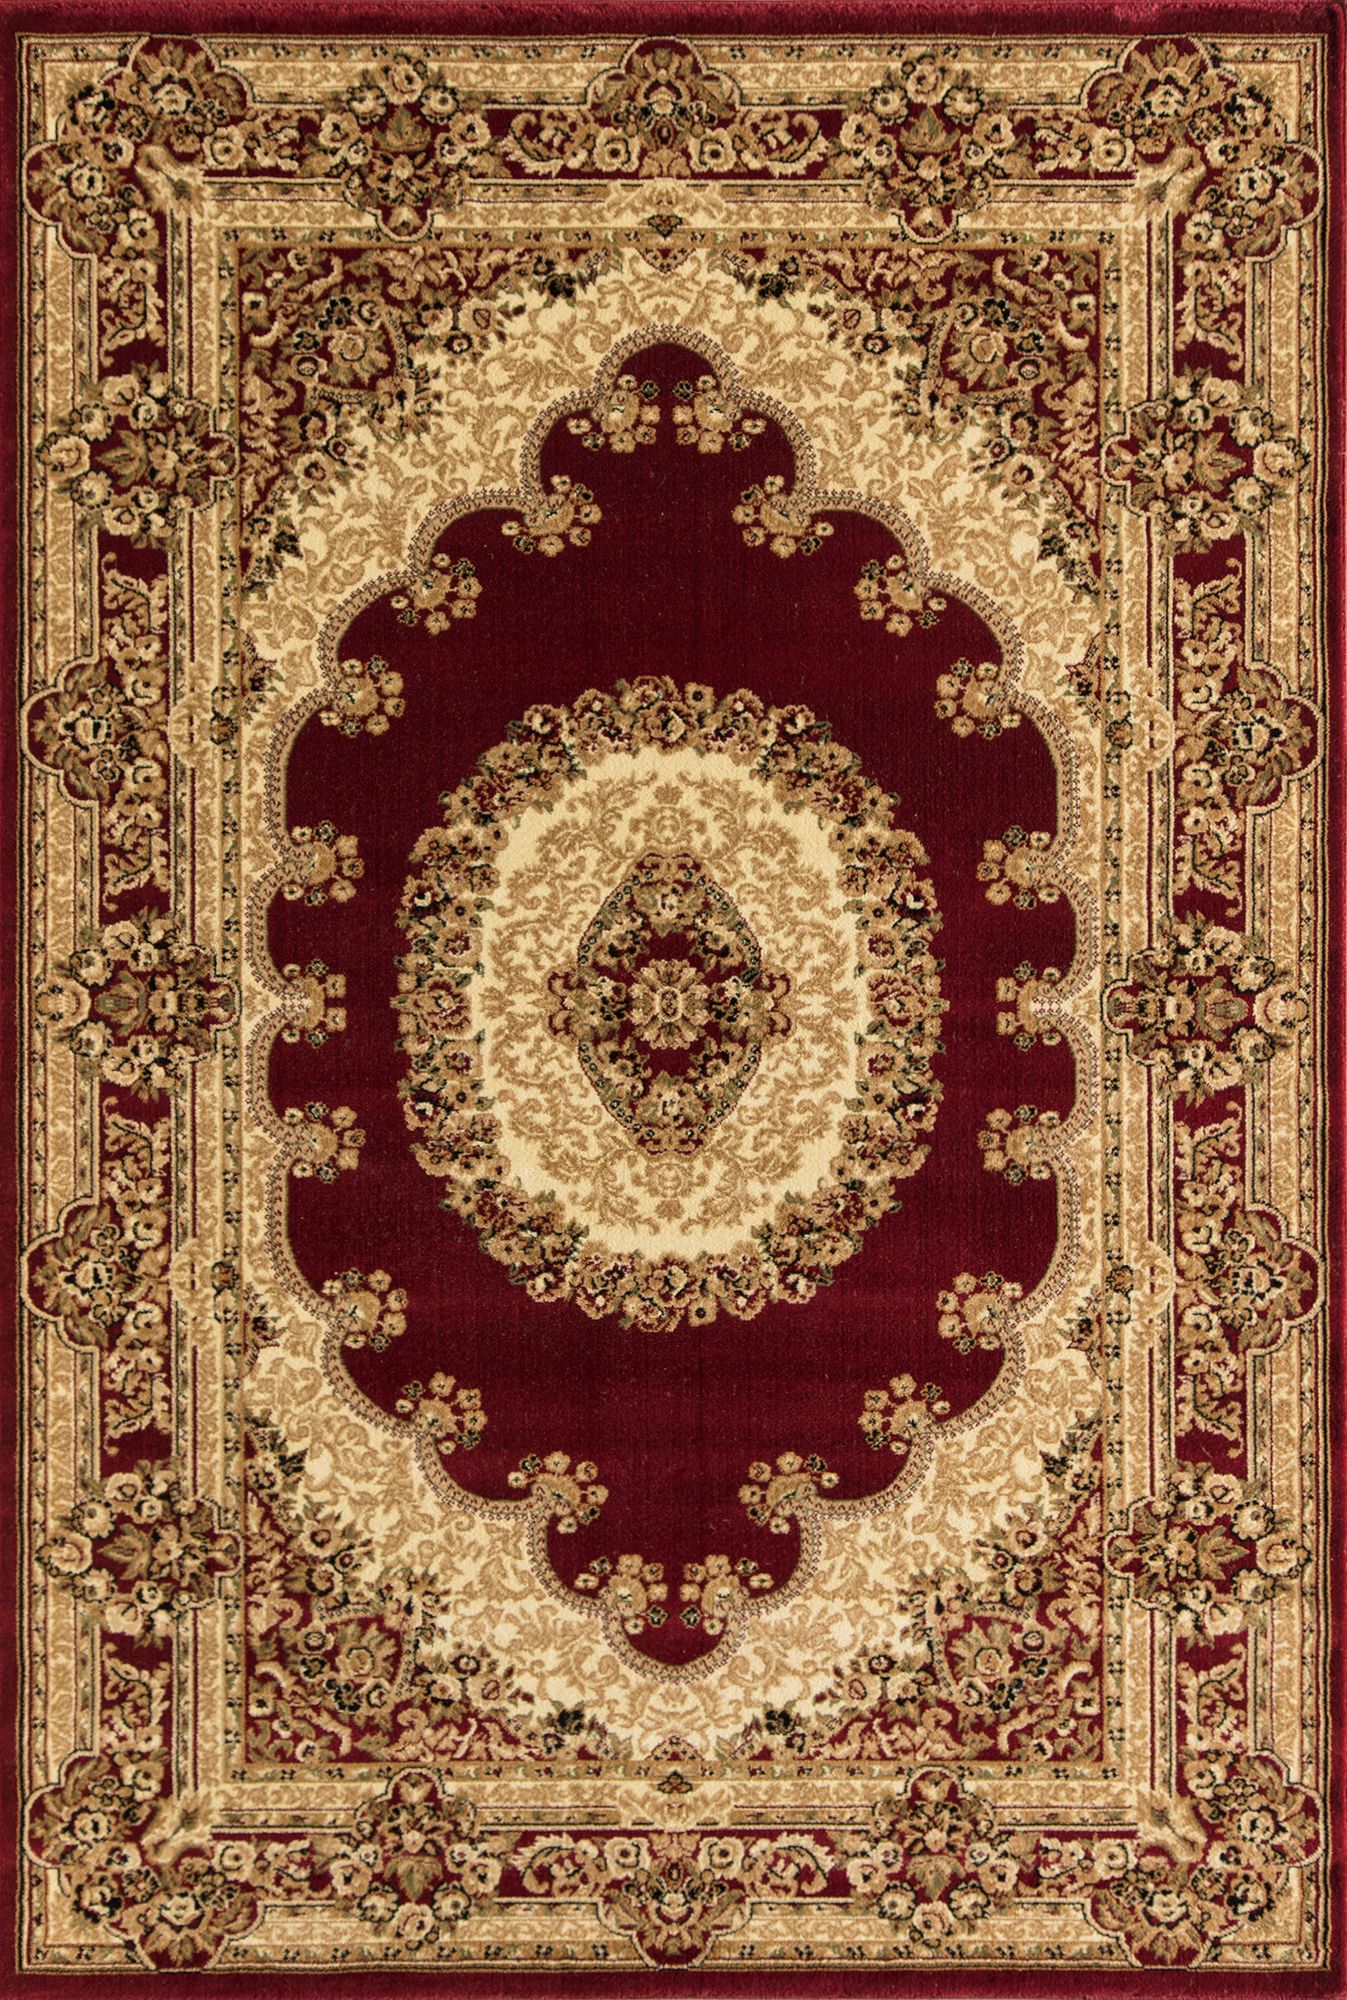 Rugs America Vista 807-RED Kerman Red Oriental Traditional Red Area Rug, 3'11"x5'3" - image 4 of 5